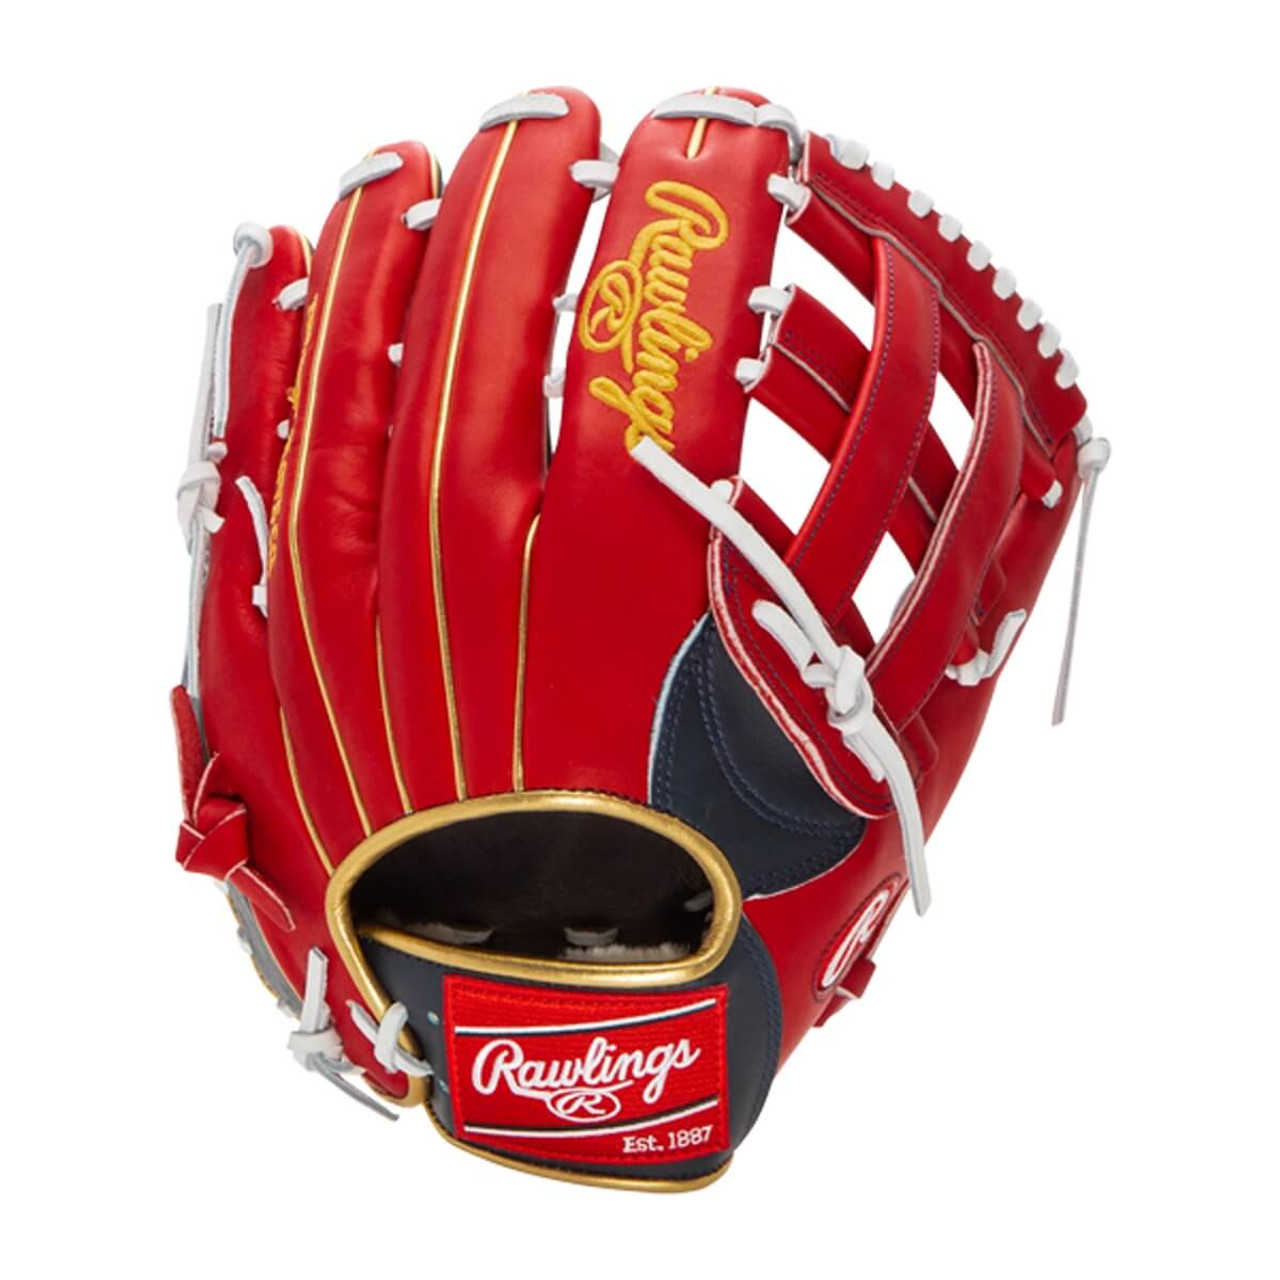 11.75-Inch Rawlings R2G Infield Glove - Francisco Lindor Pattern